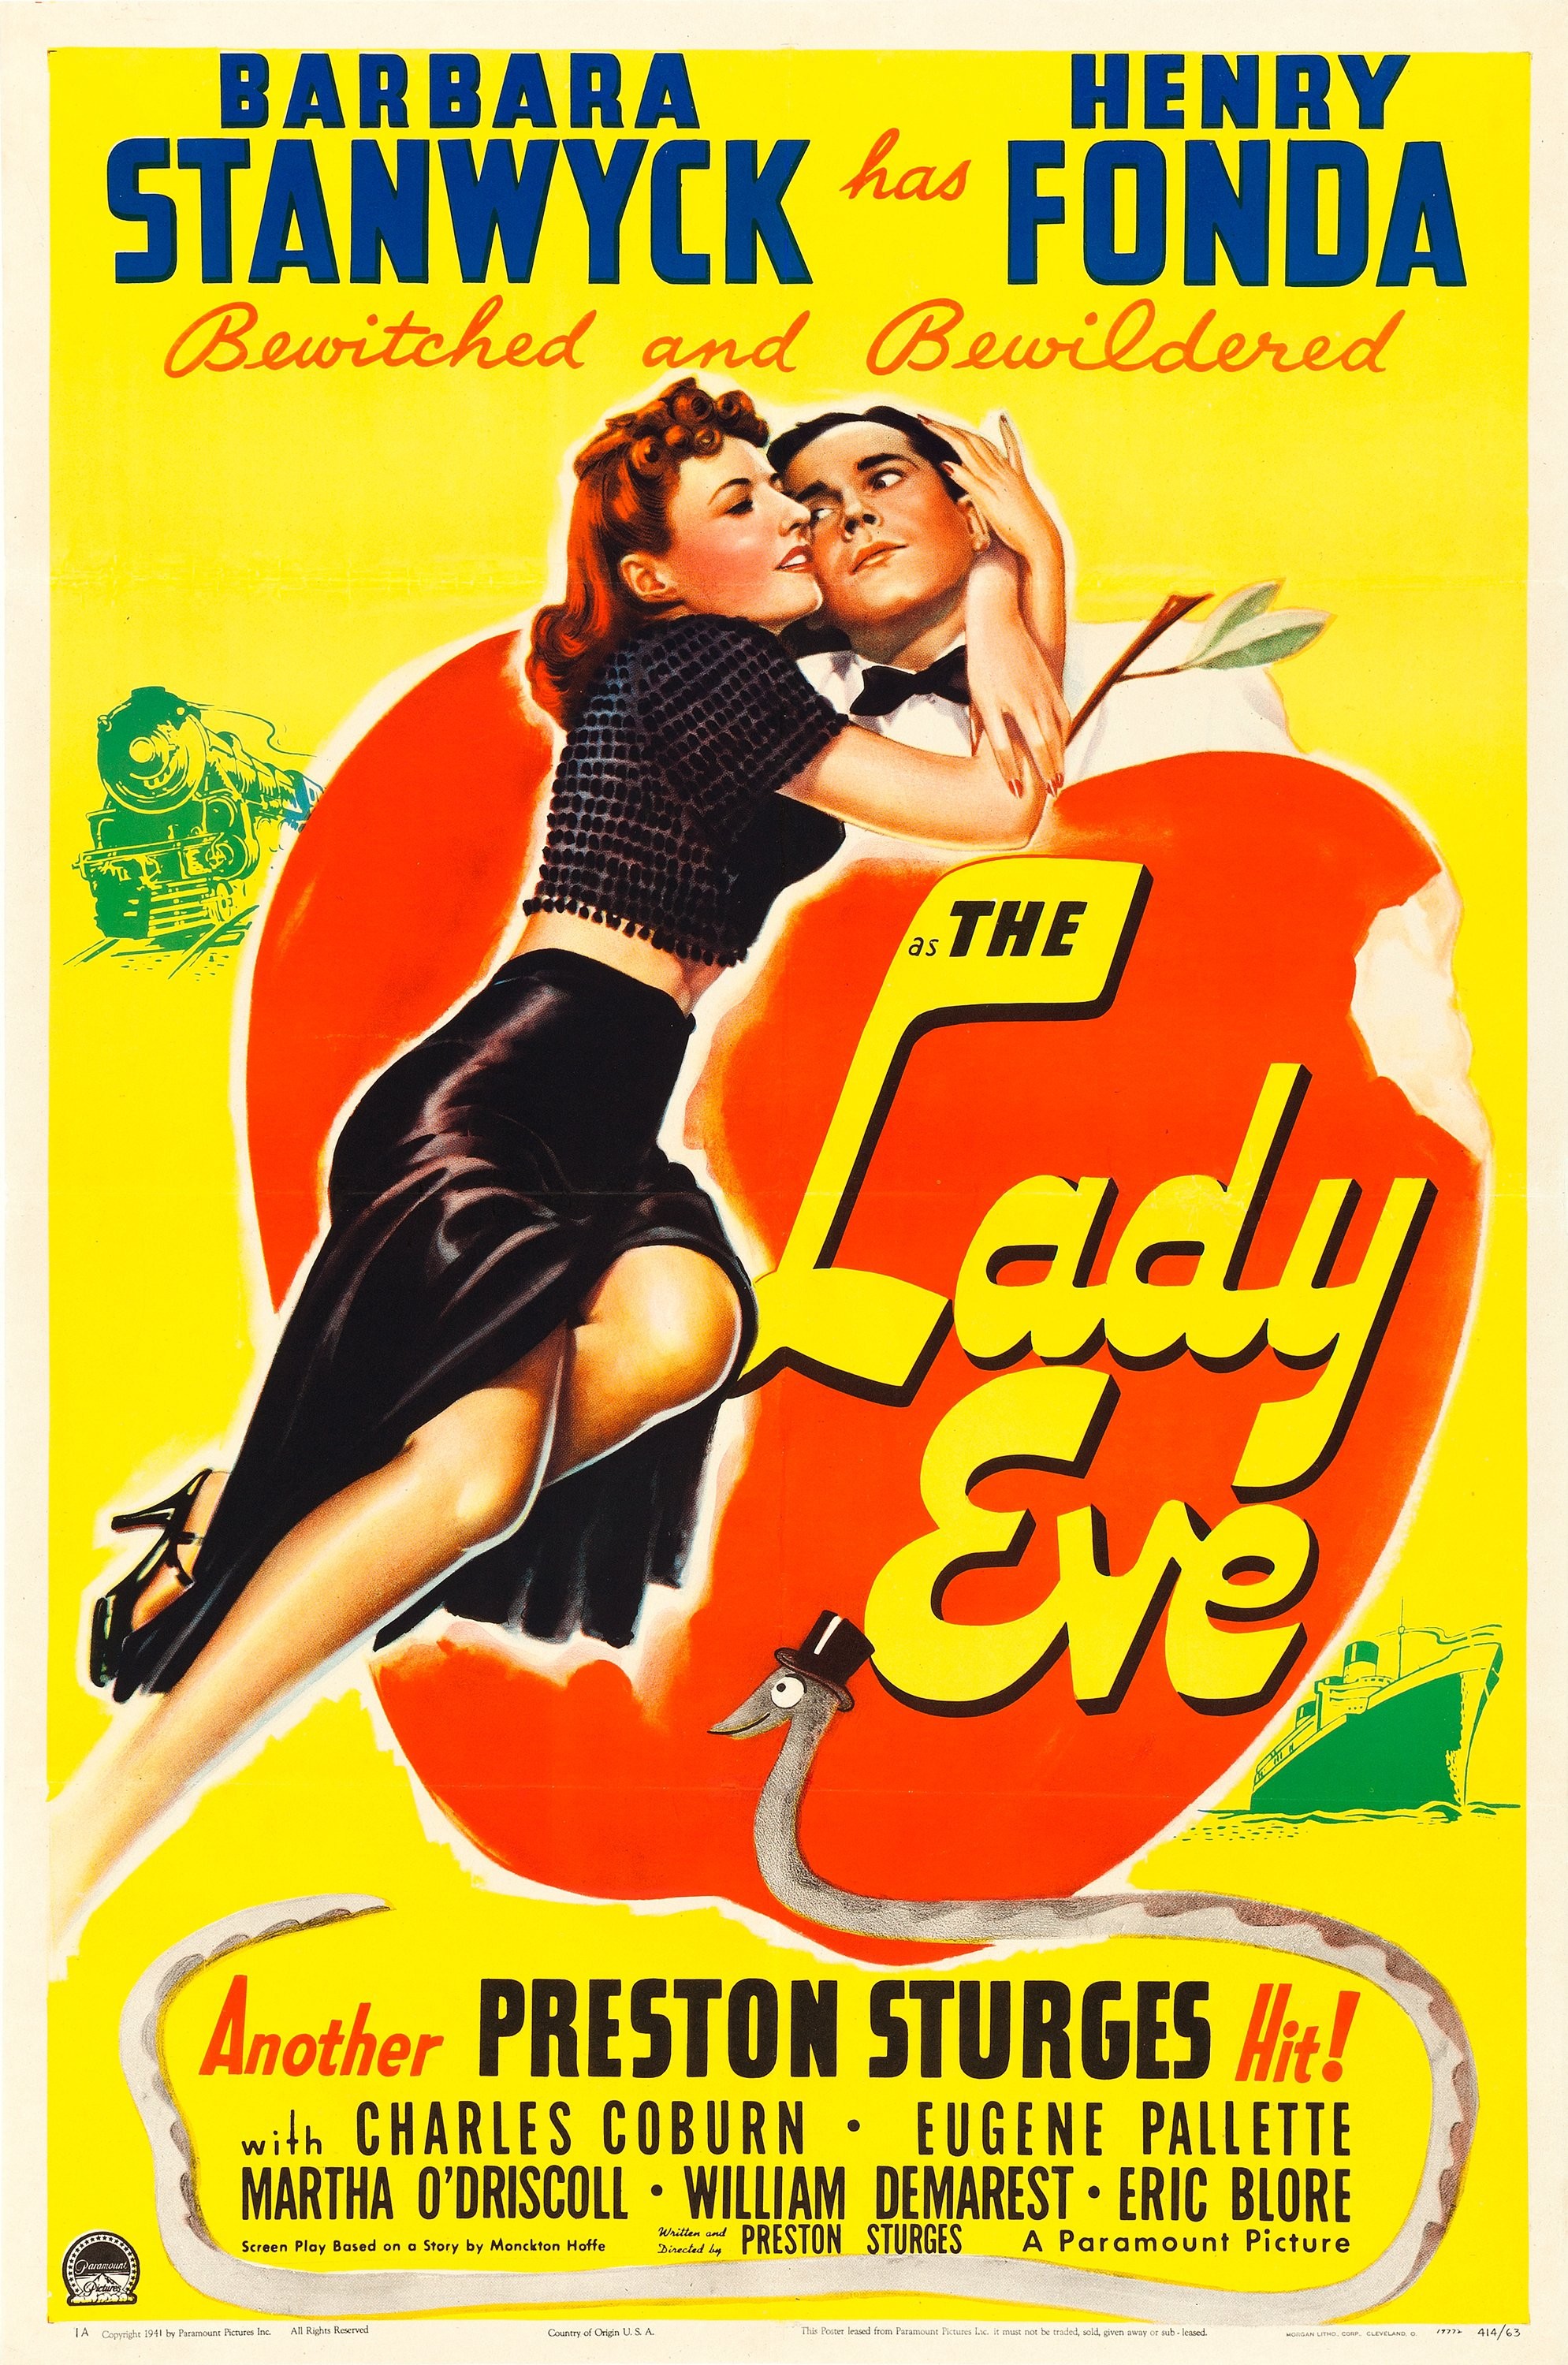 THE LADY EVE